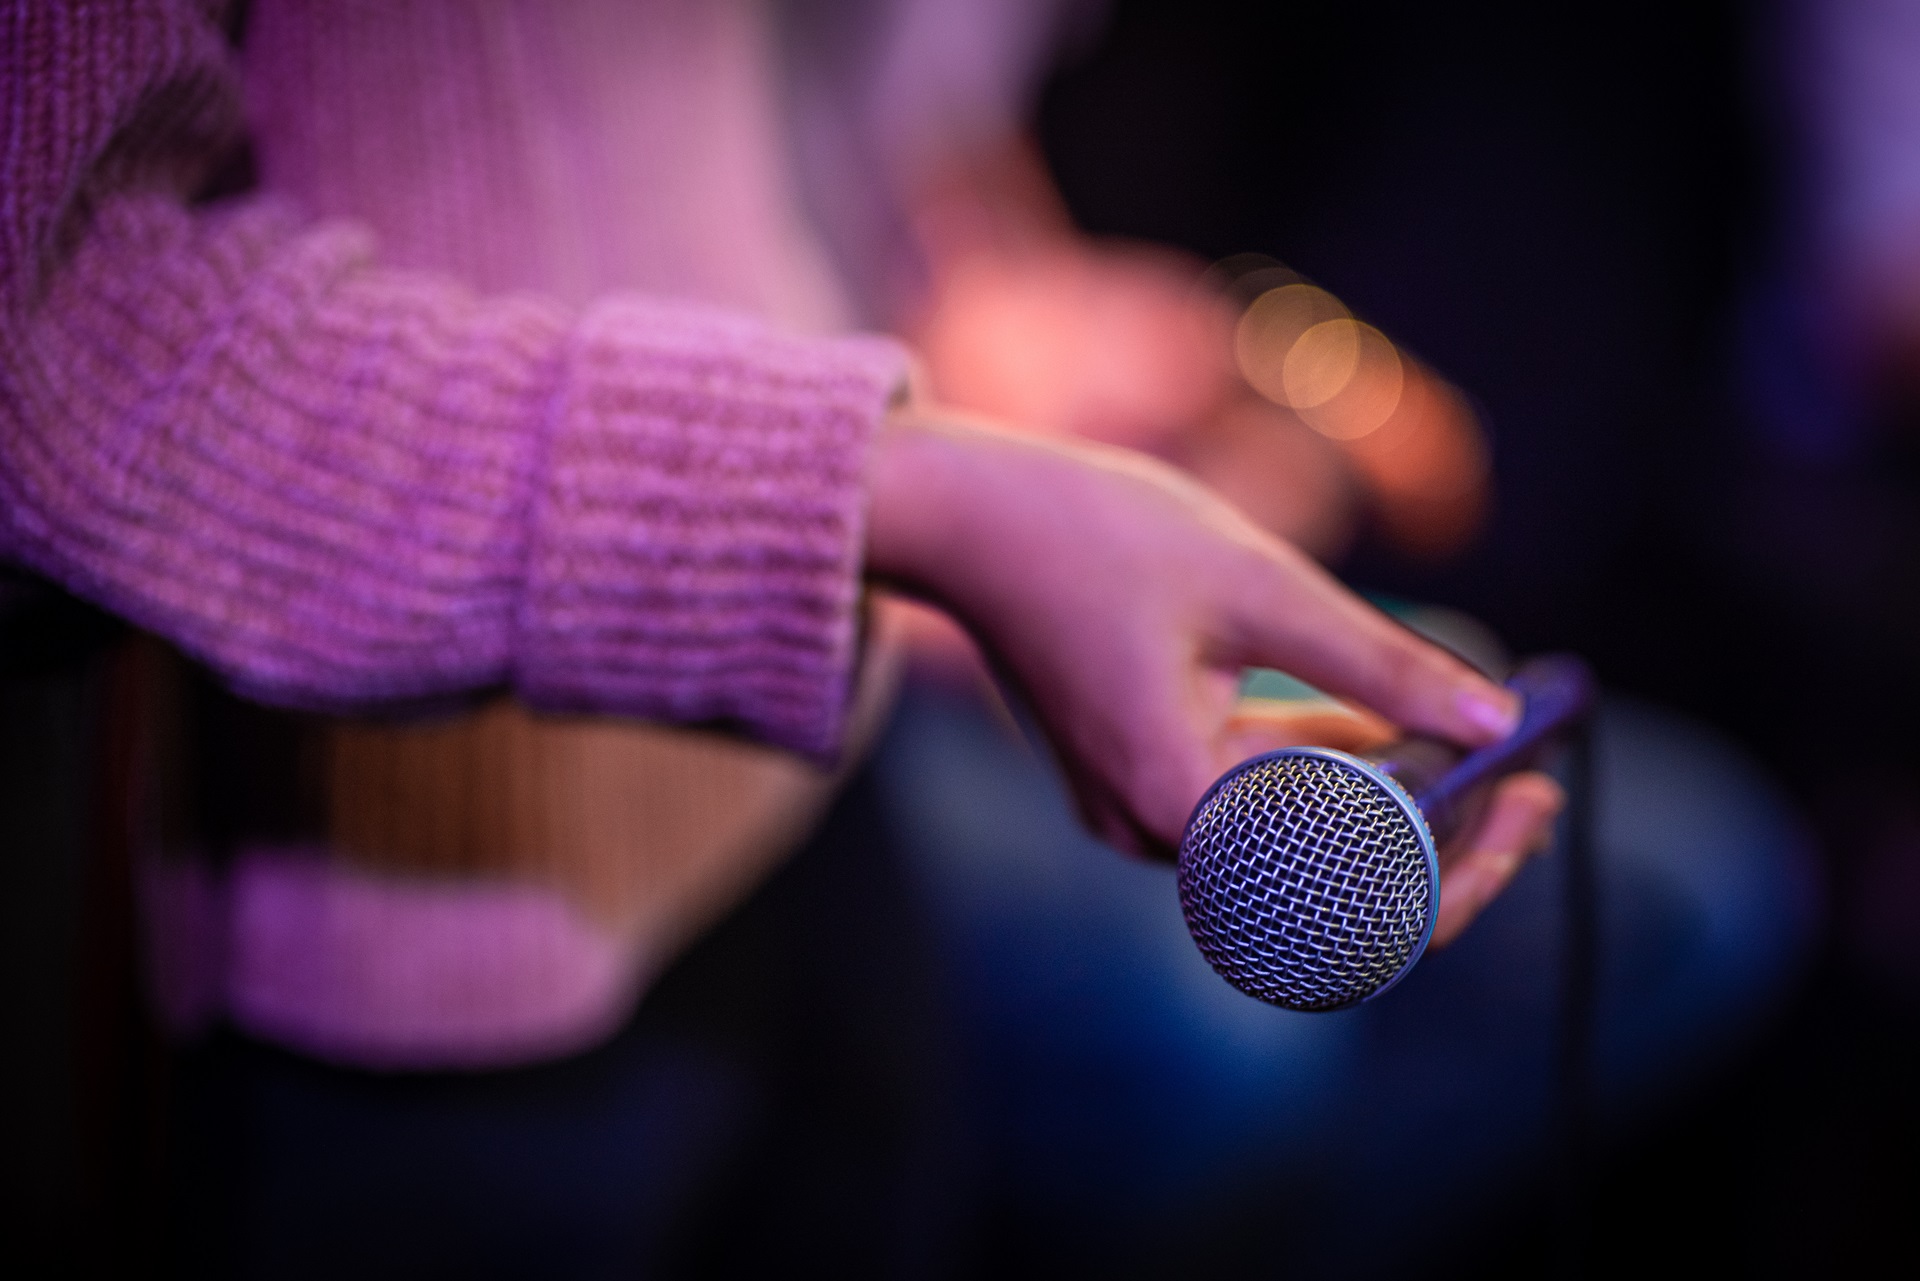 jazz voice holding a microphone